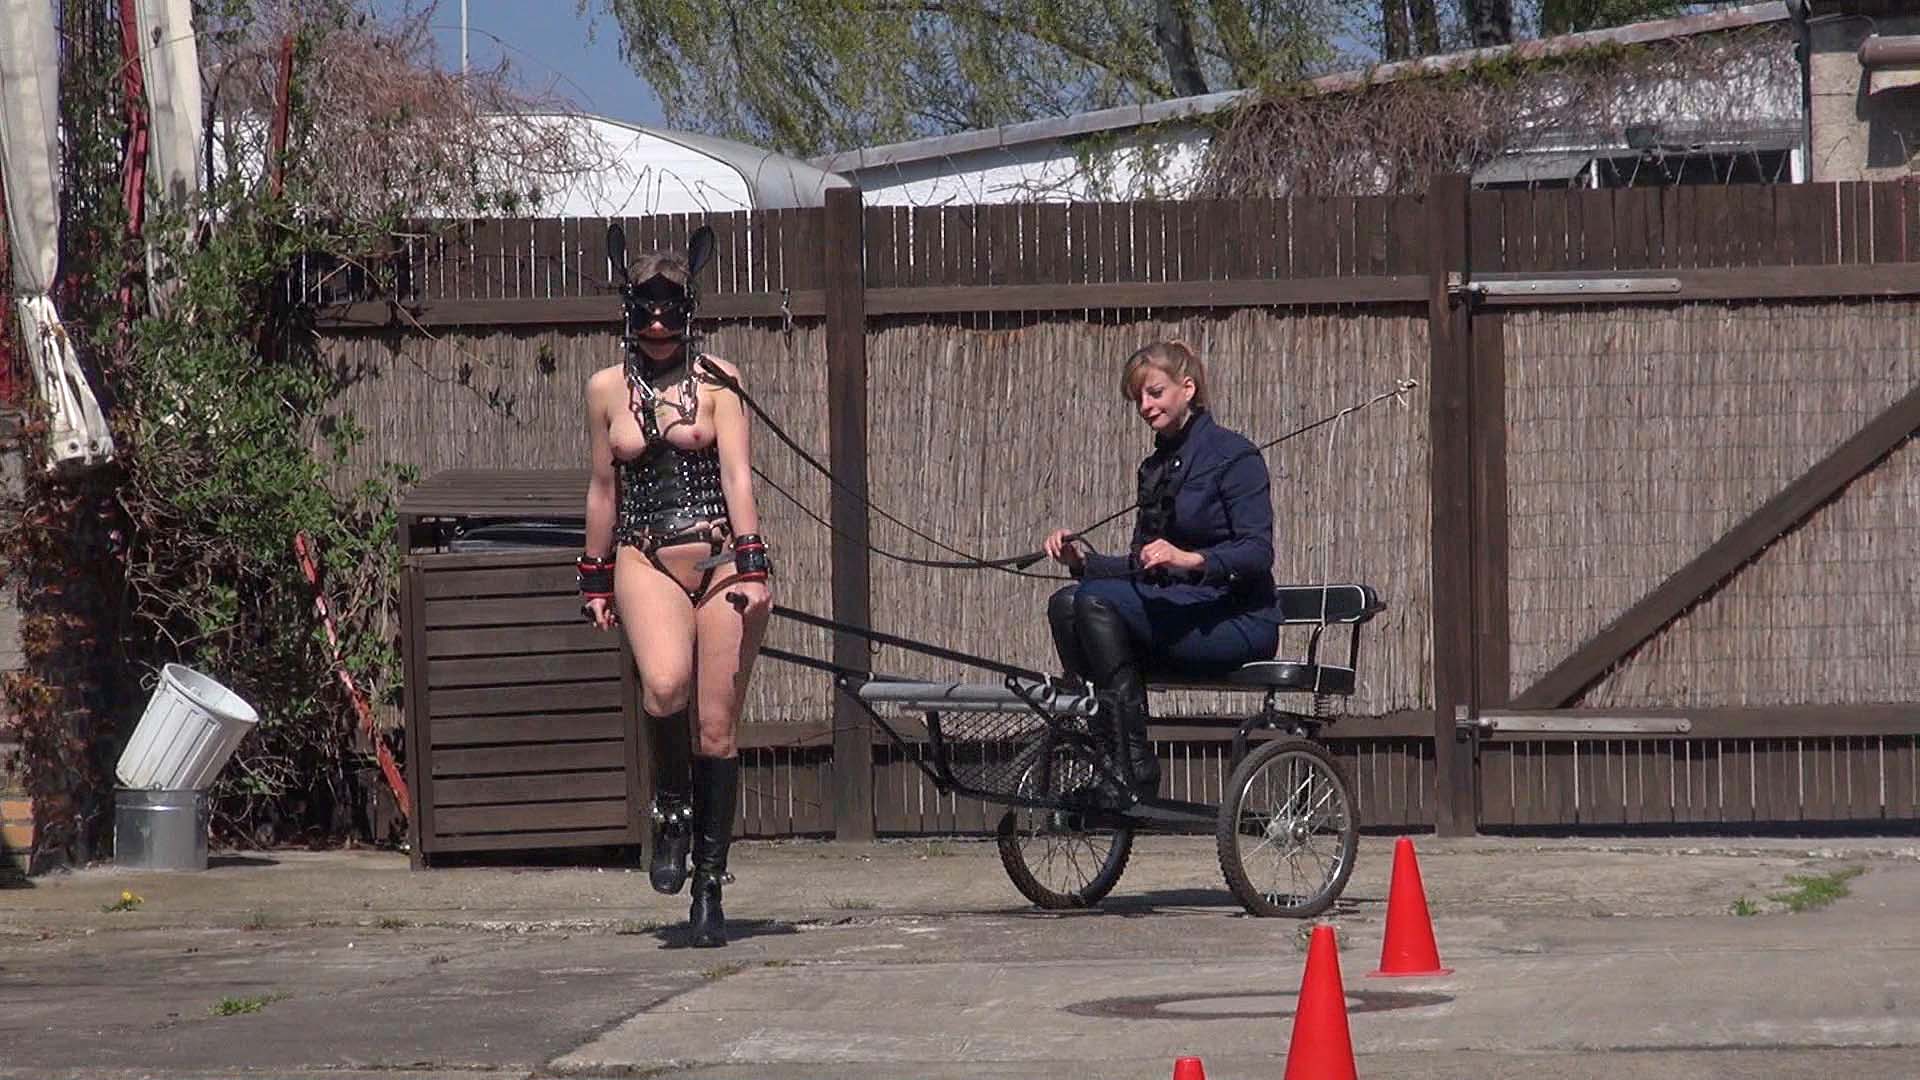 Ponygirl 3 - Preparation for a ride! 